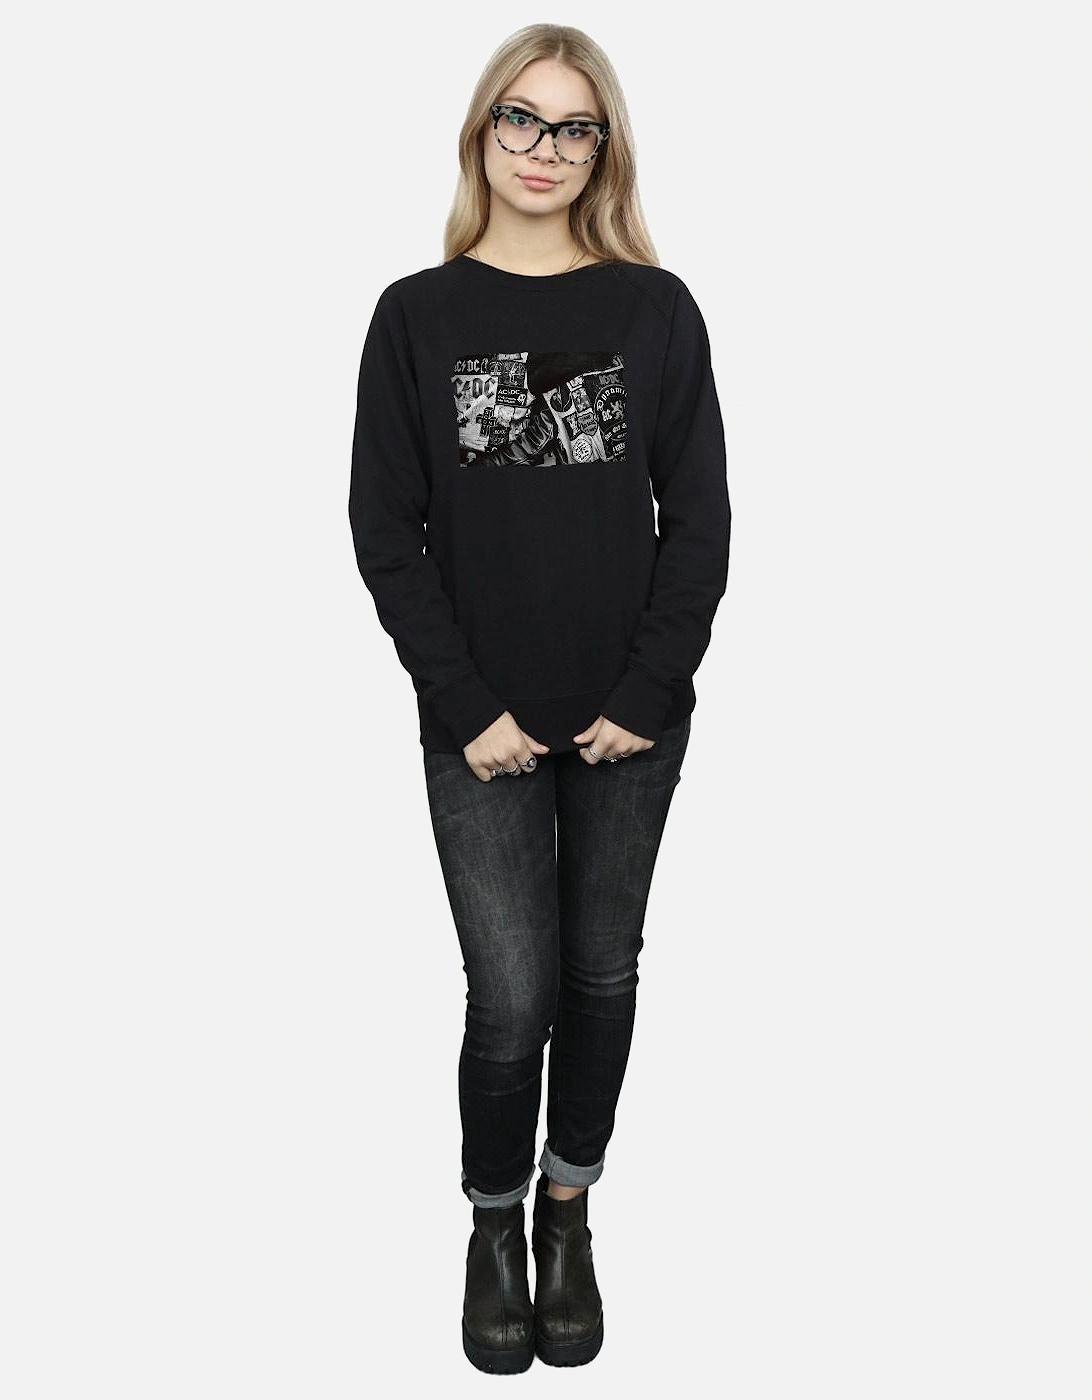 Womens/Ladies Badges And Posters Collection Sweatshirt